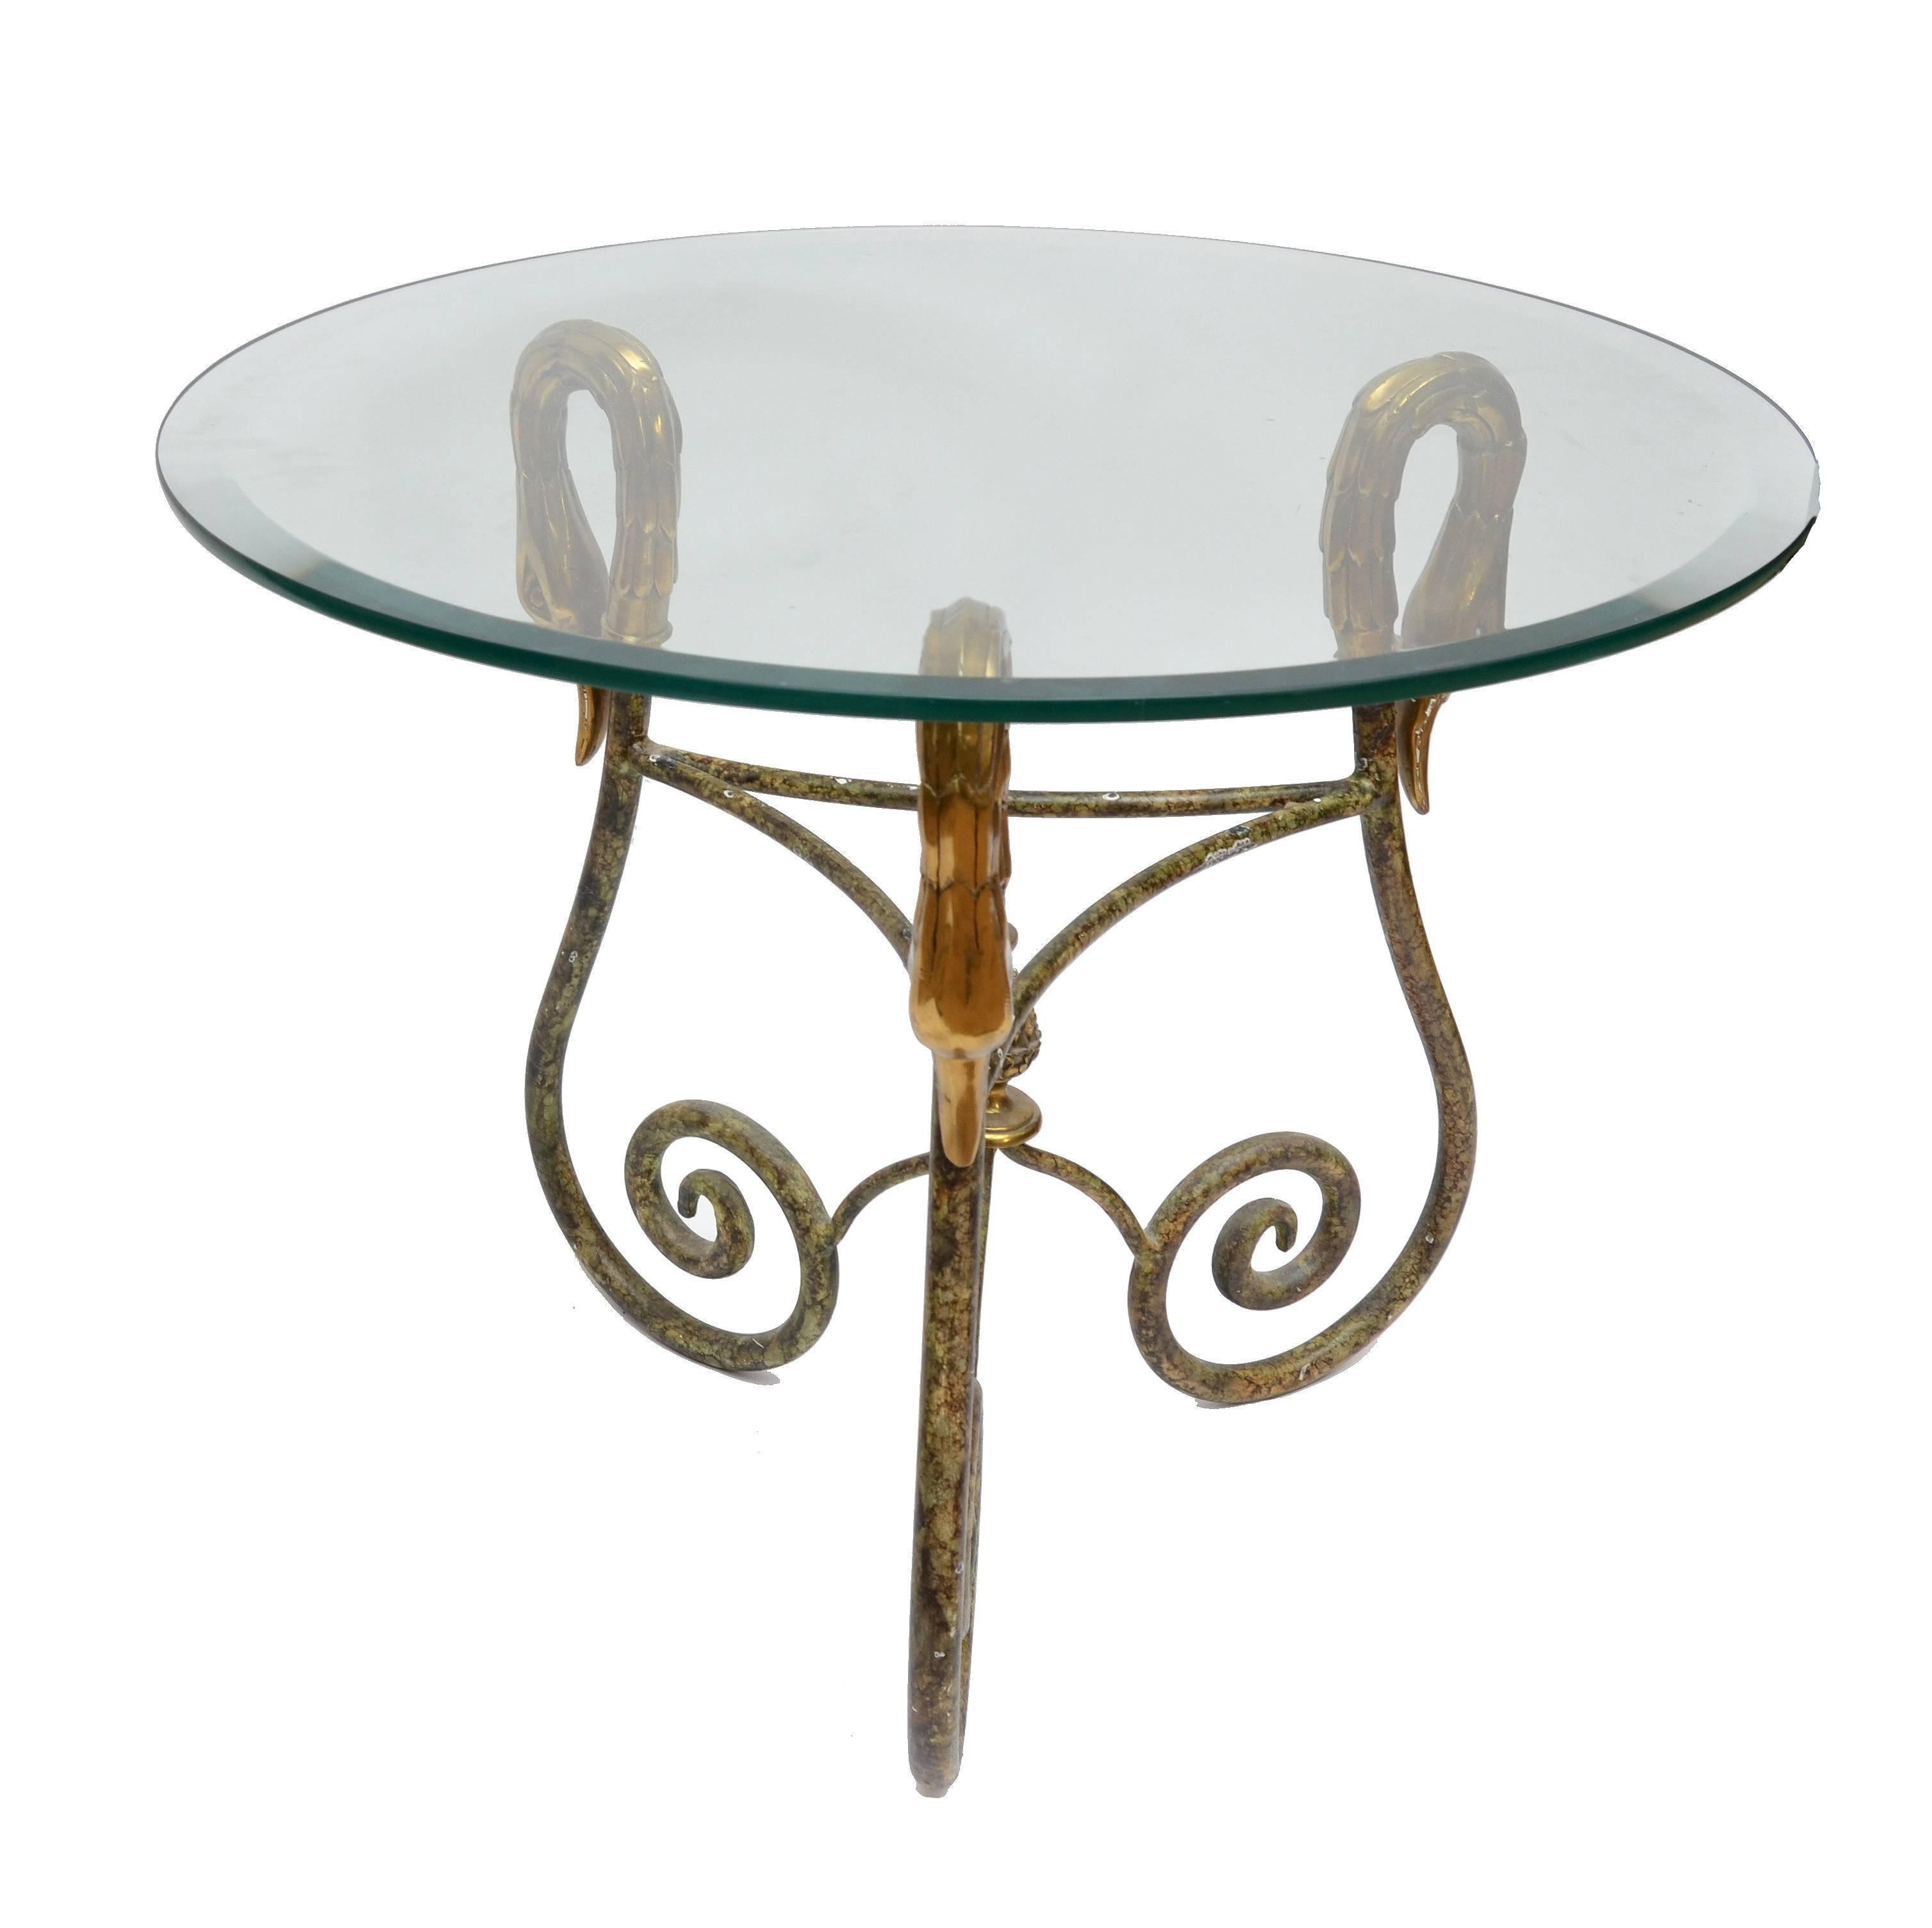 1950s Hollywod Regency spectacular round Italian side table with brass swan heads and acorns embedded in a wrought iron core.
The glass top is beveled.
Very impressive and decorative as well with great craftsmanship.
Dimension:
Base: 18 inches x 18